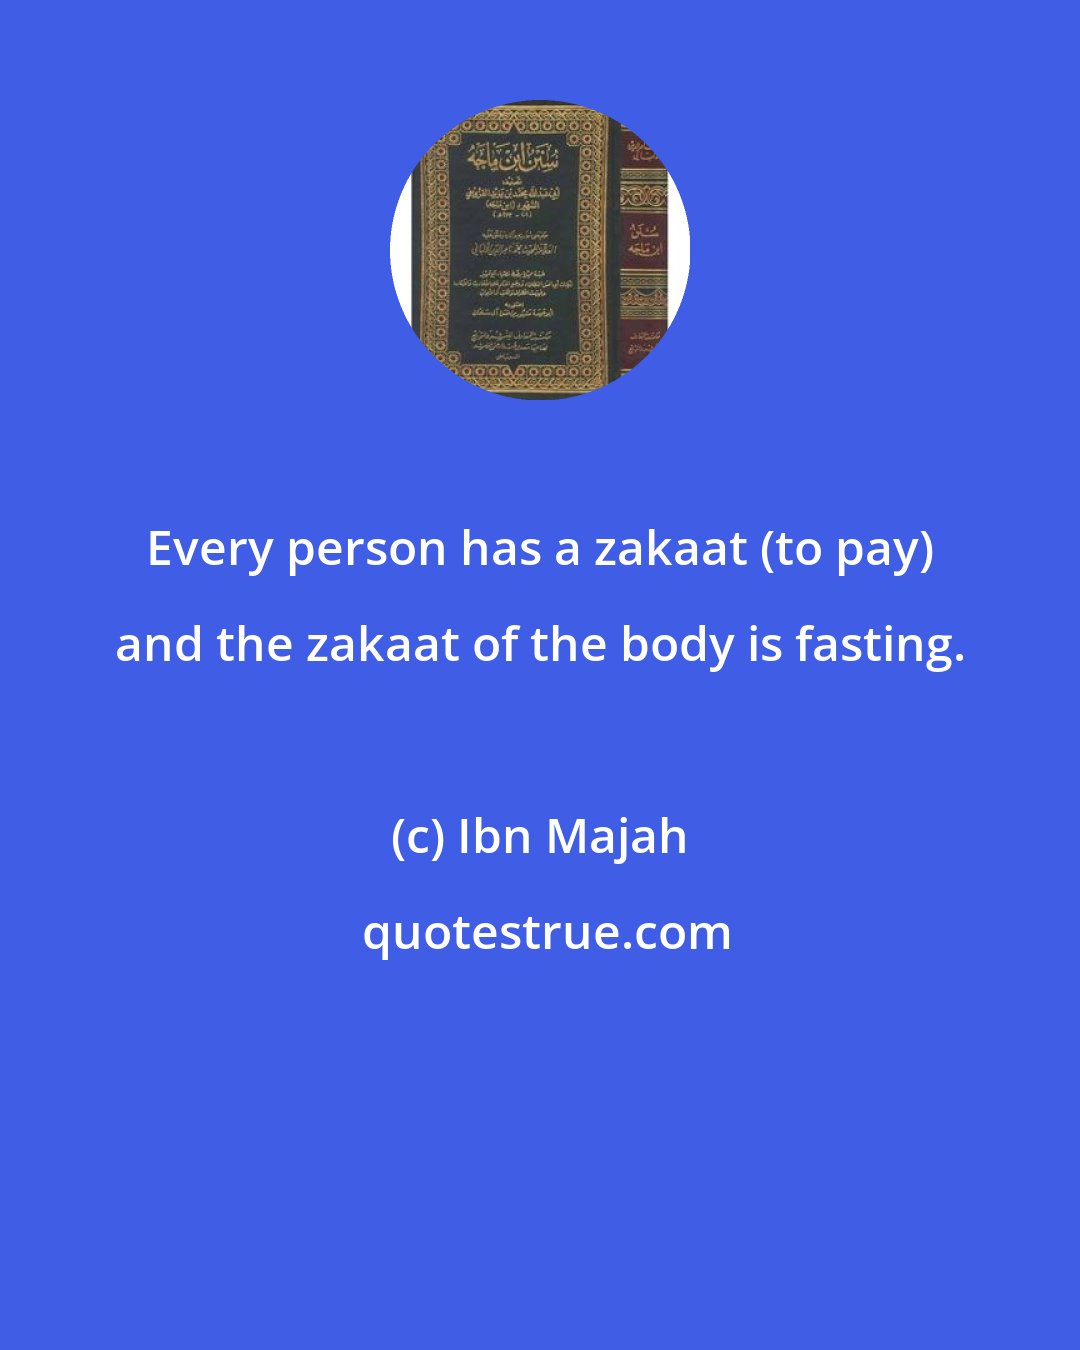 Ibn Majah: Every person has a zakaat (to pay) and the zakaat of the body is fasting.